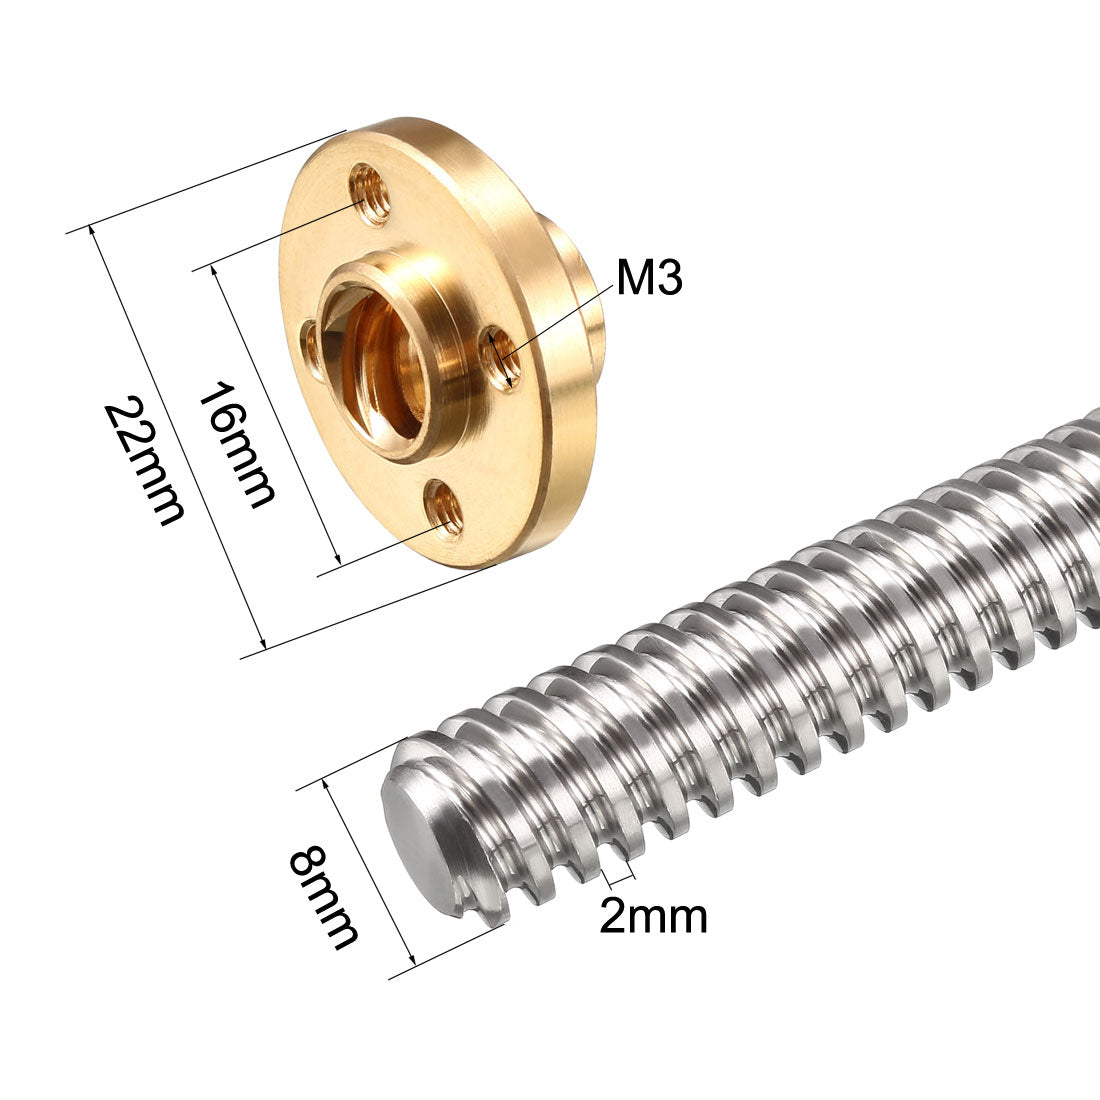 uxcell Uxcell 2PCS 150mm T8 Pitch 2mm Lead 2mm Lead Screw Rod with Copper Nut for 3D Printer